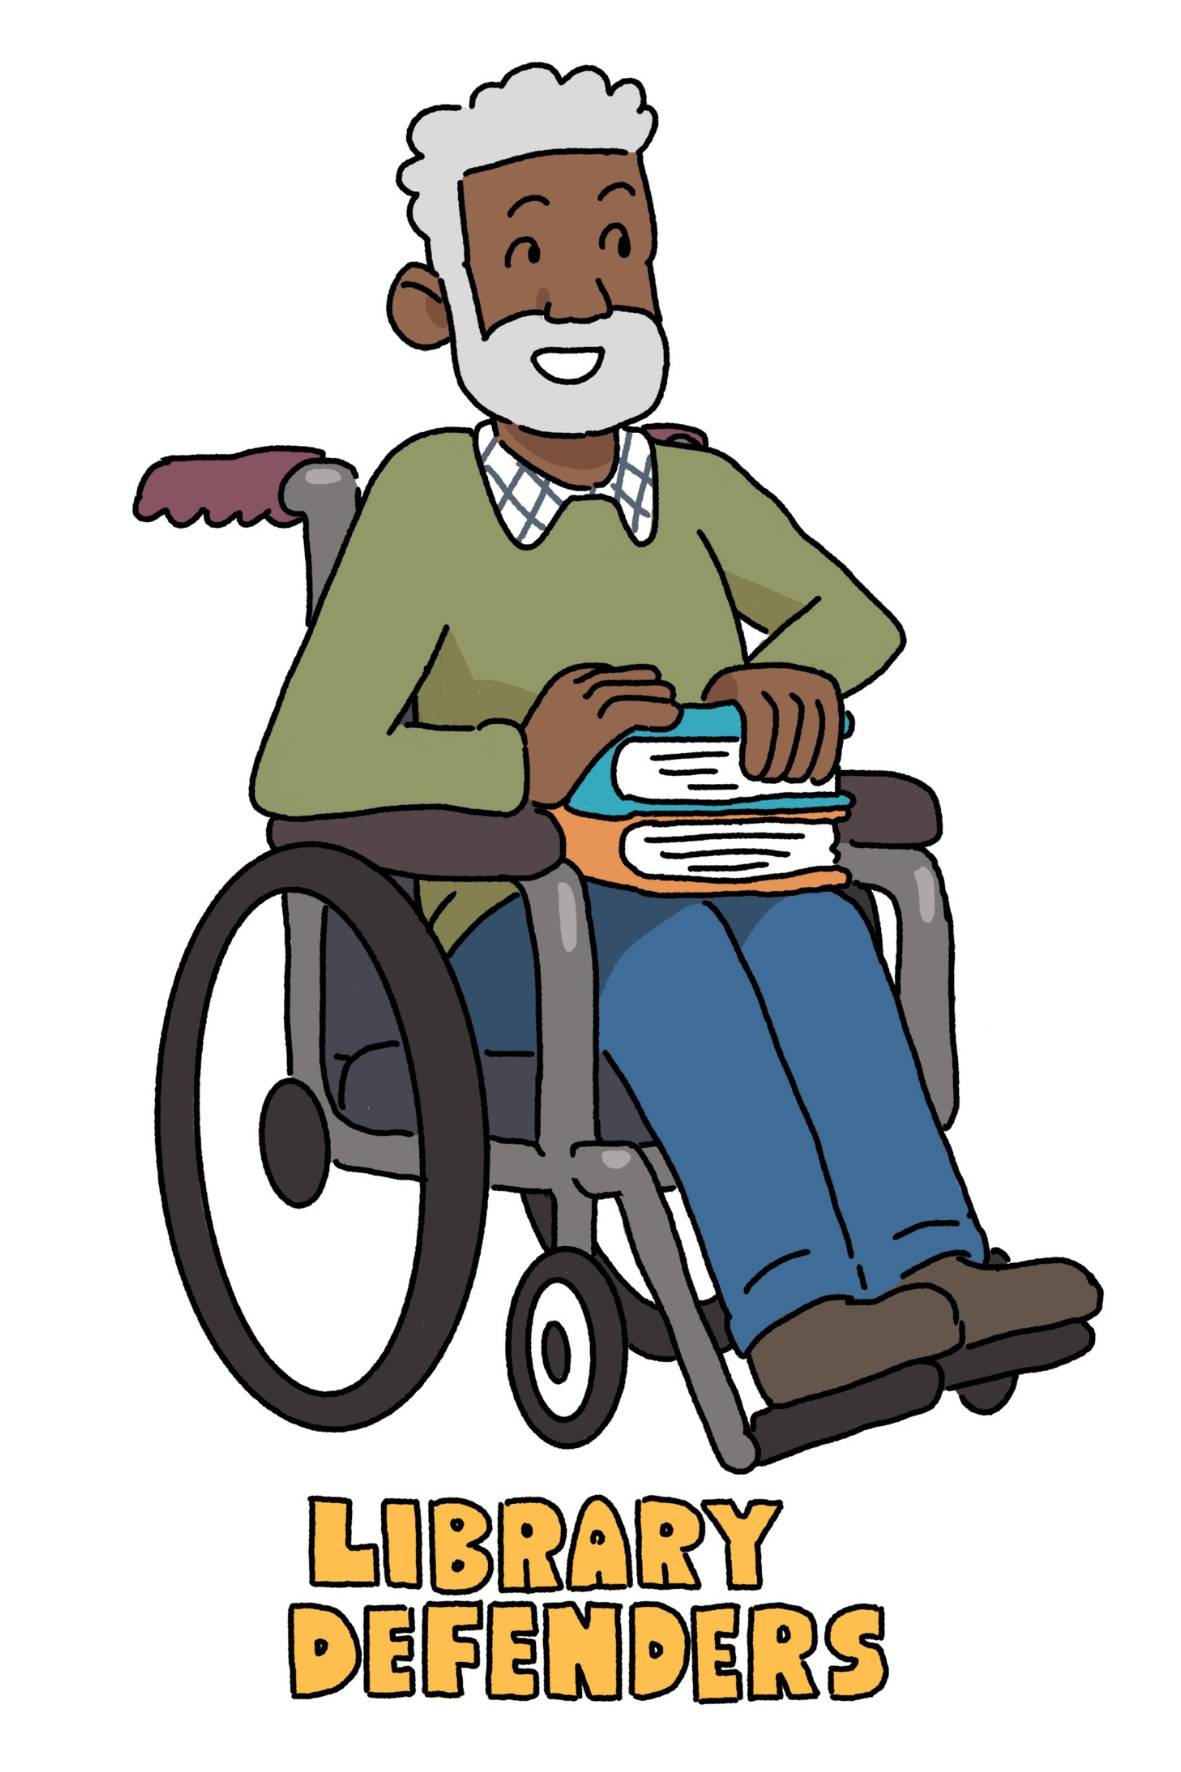 A cartoon illustration of a man in a wheelchair holding a stack of two books. A cartoon illustration caption says "Library Defenders." Art by Flynn Nicholls.